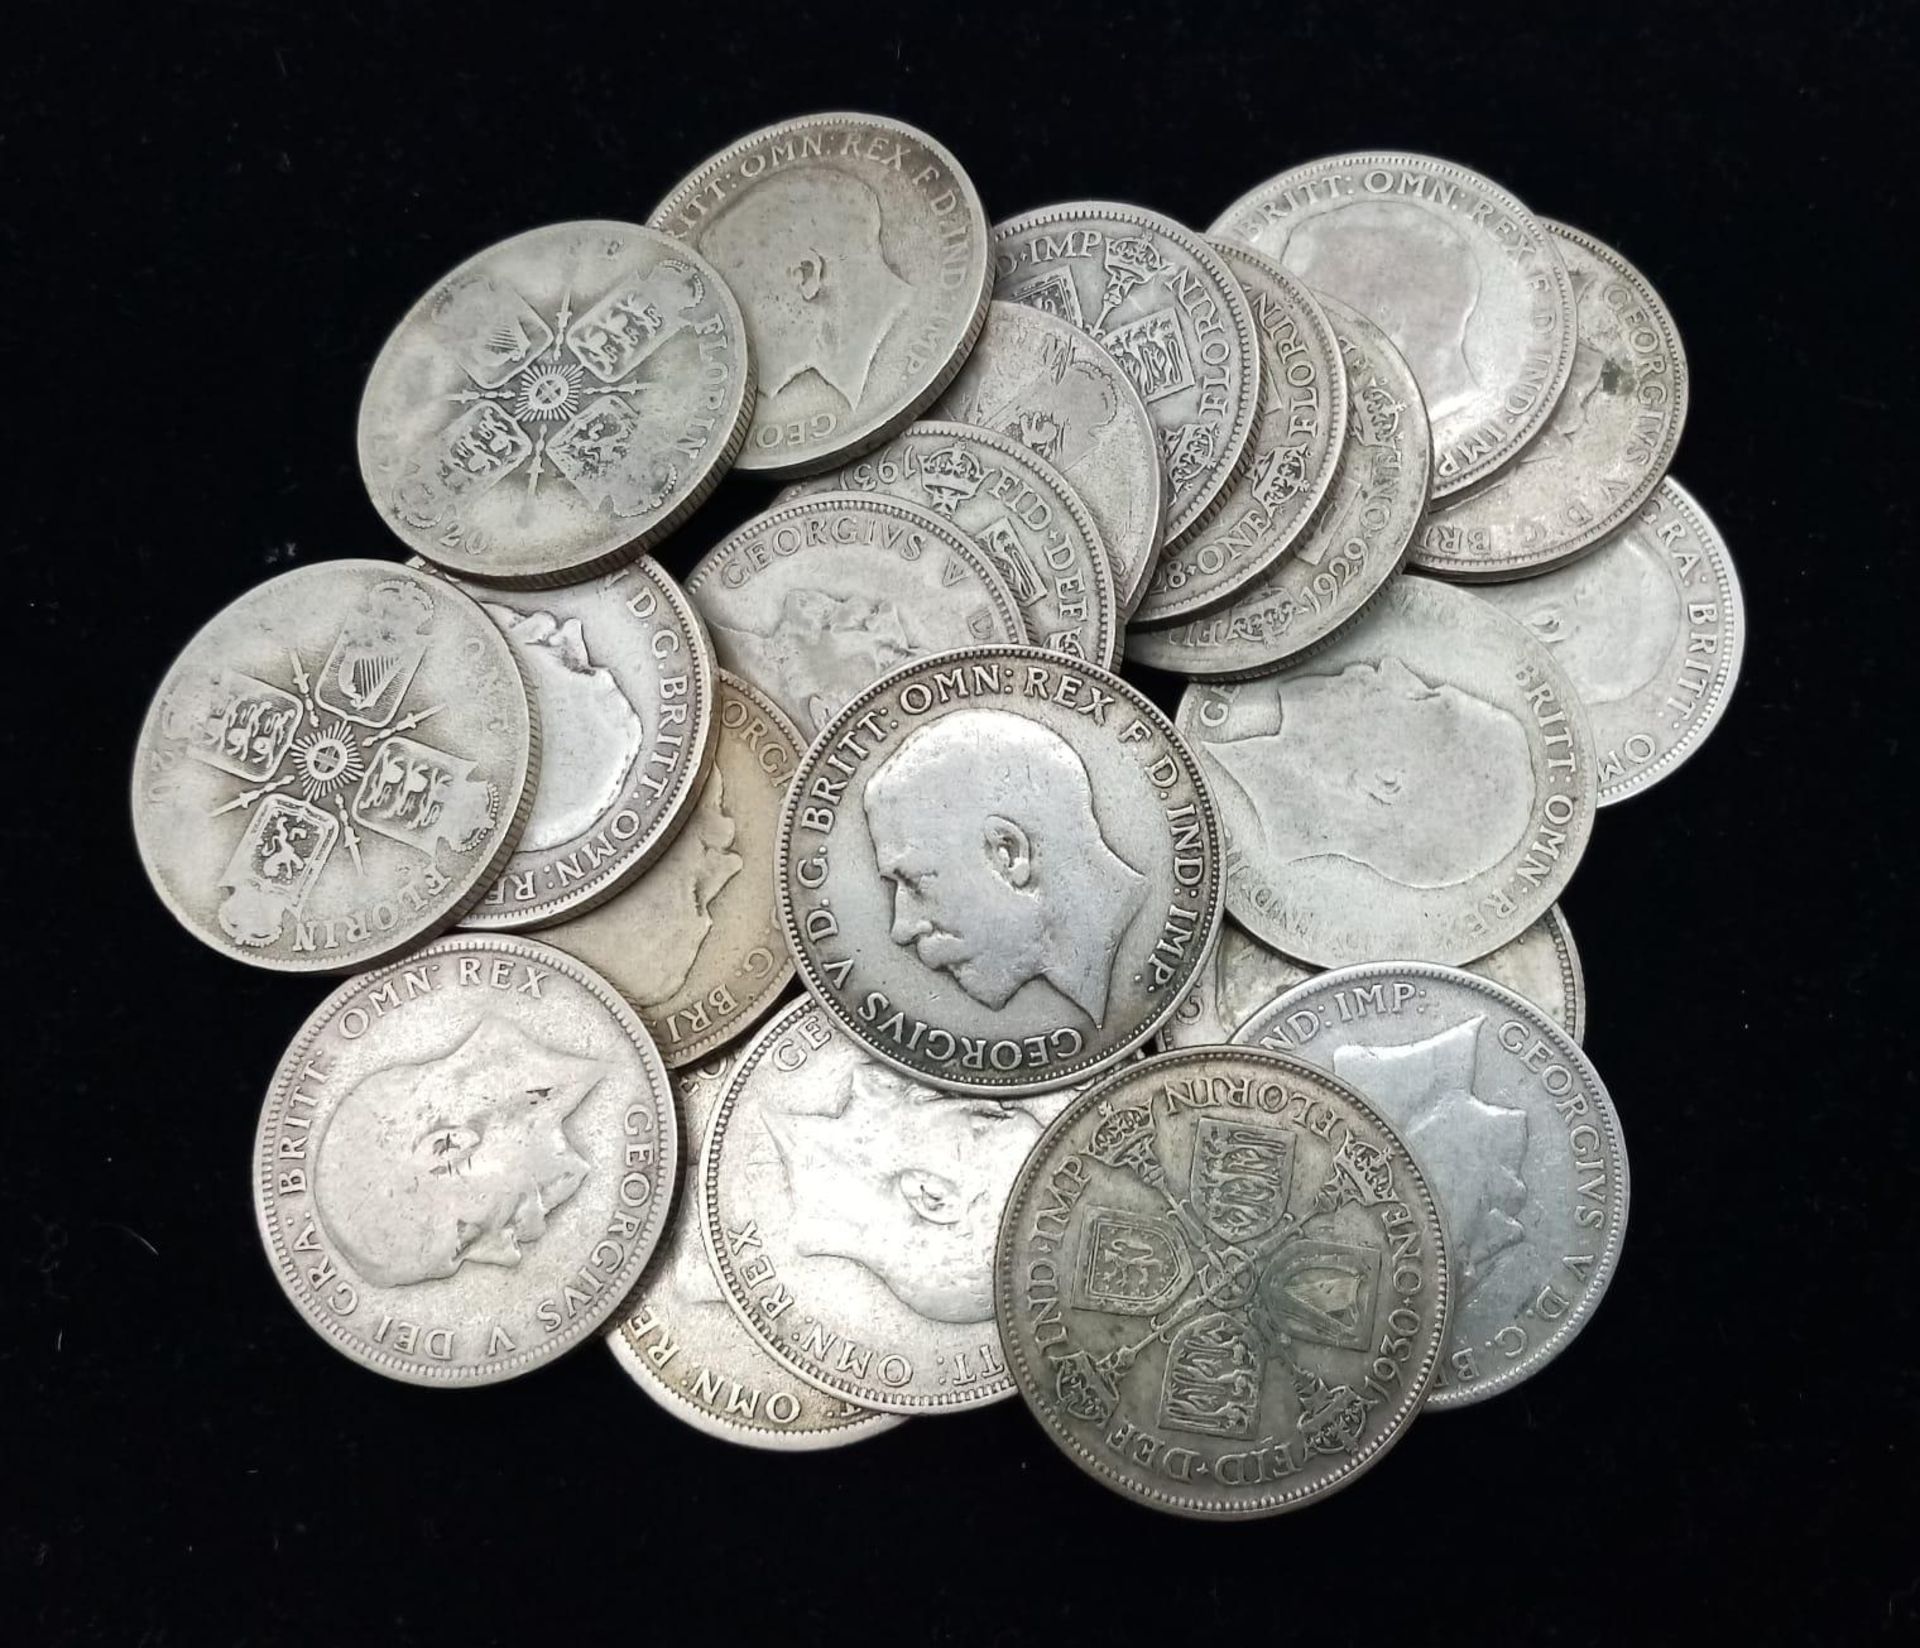 23 Pre 1947 Silver Florin Coins. Please see photos for conditions. 254g total weight.